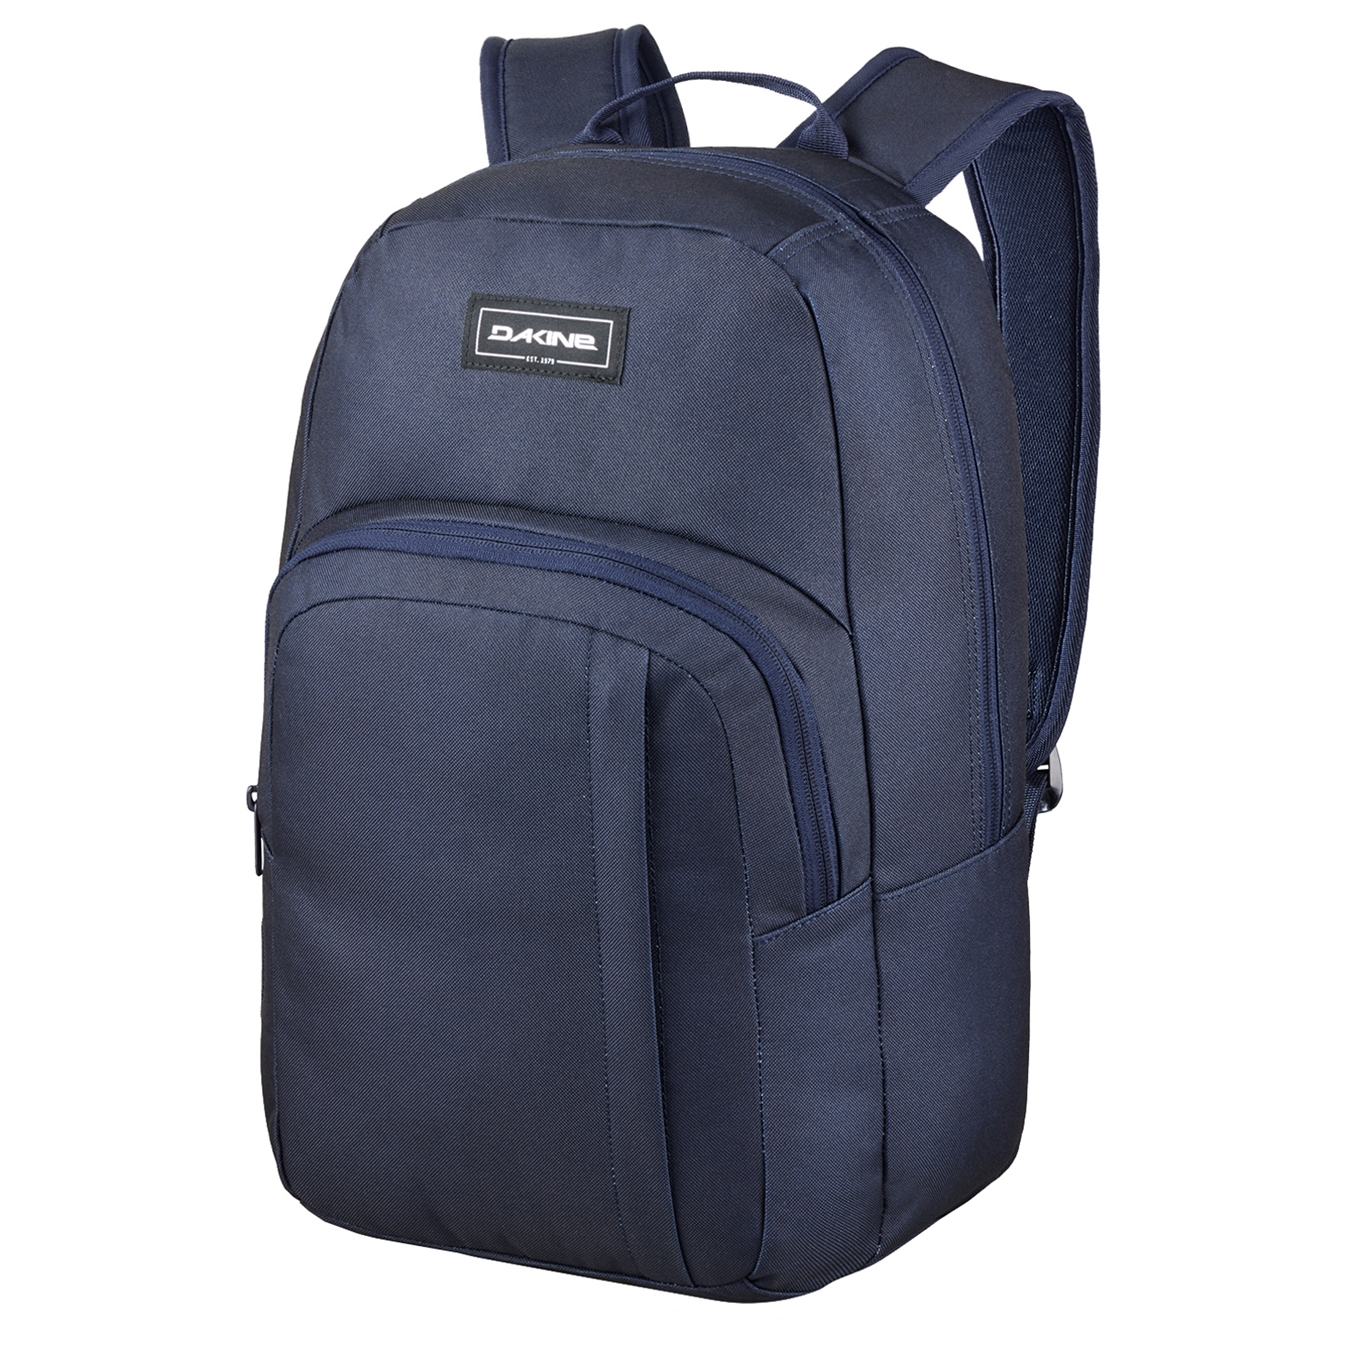 Dakine Class Backpack 25L midnight navy backpack